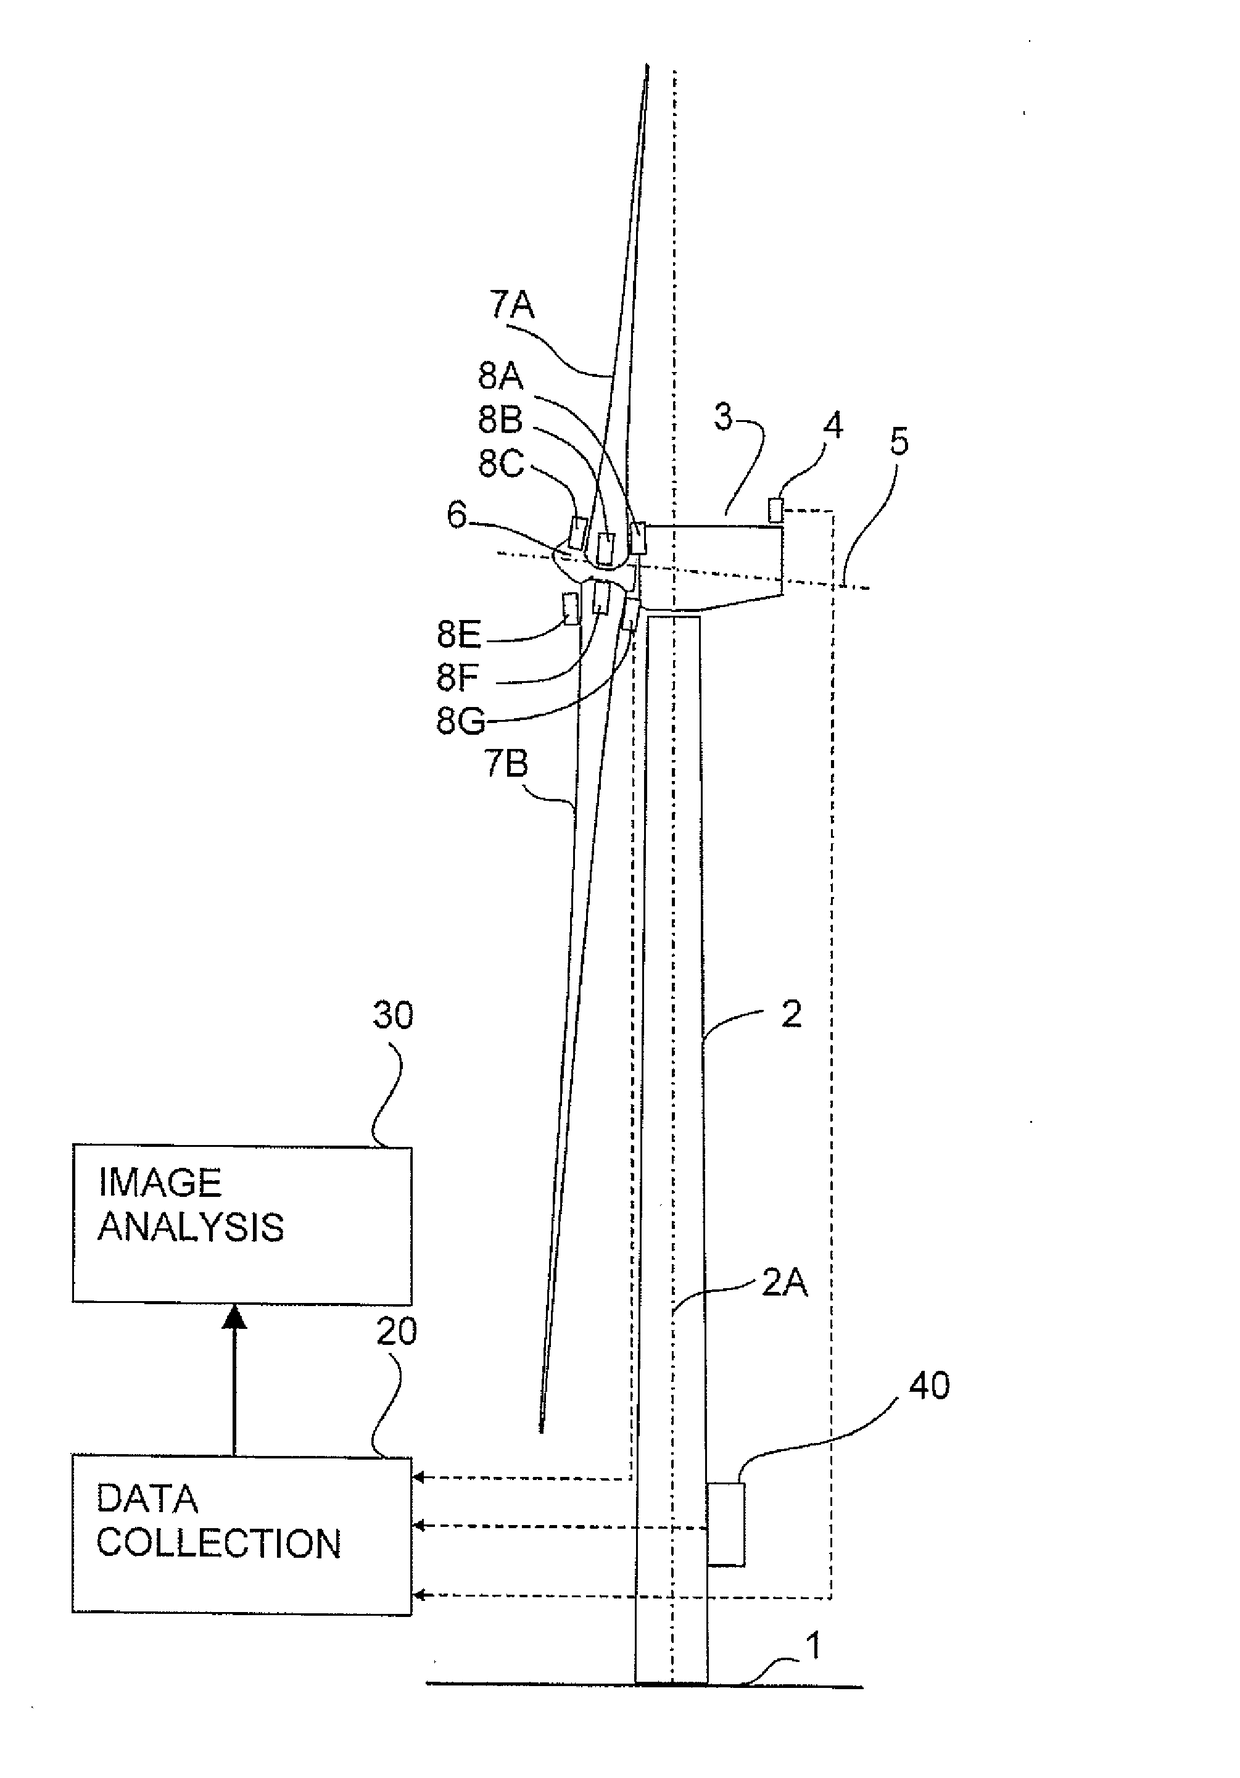 Method for Replacing the Blades of a Wind Turbine to Maintain Safe Operation